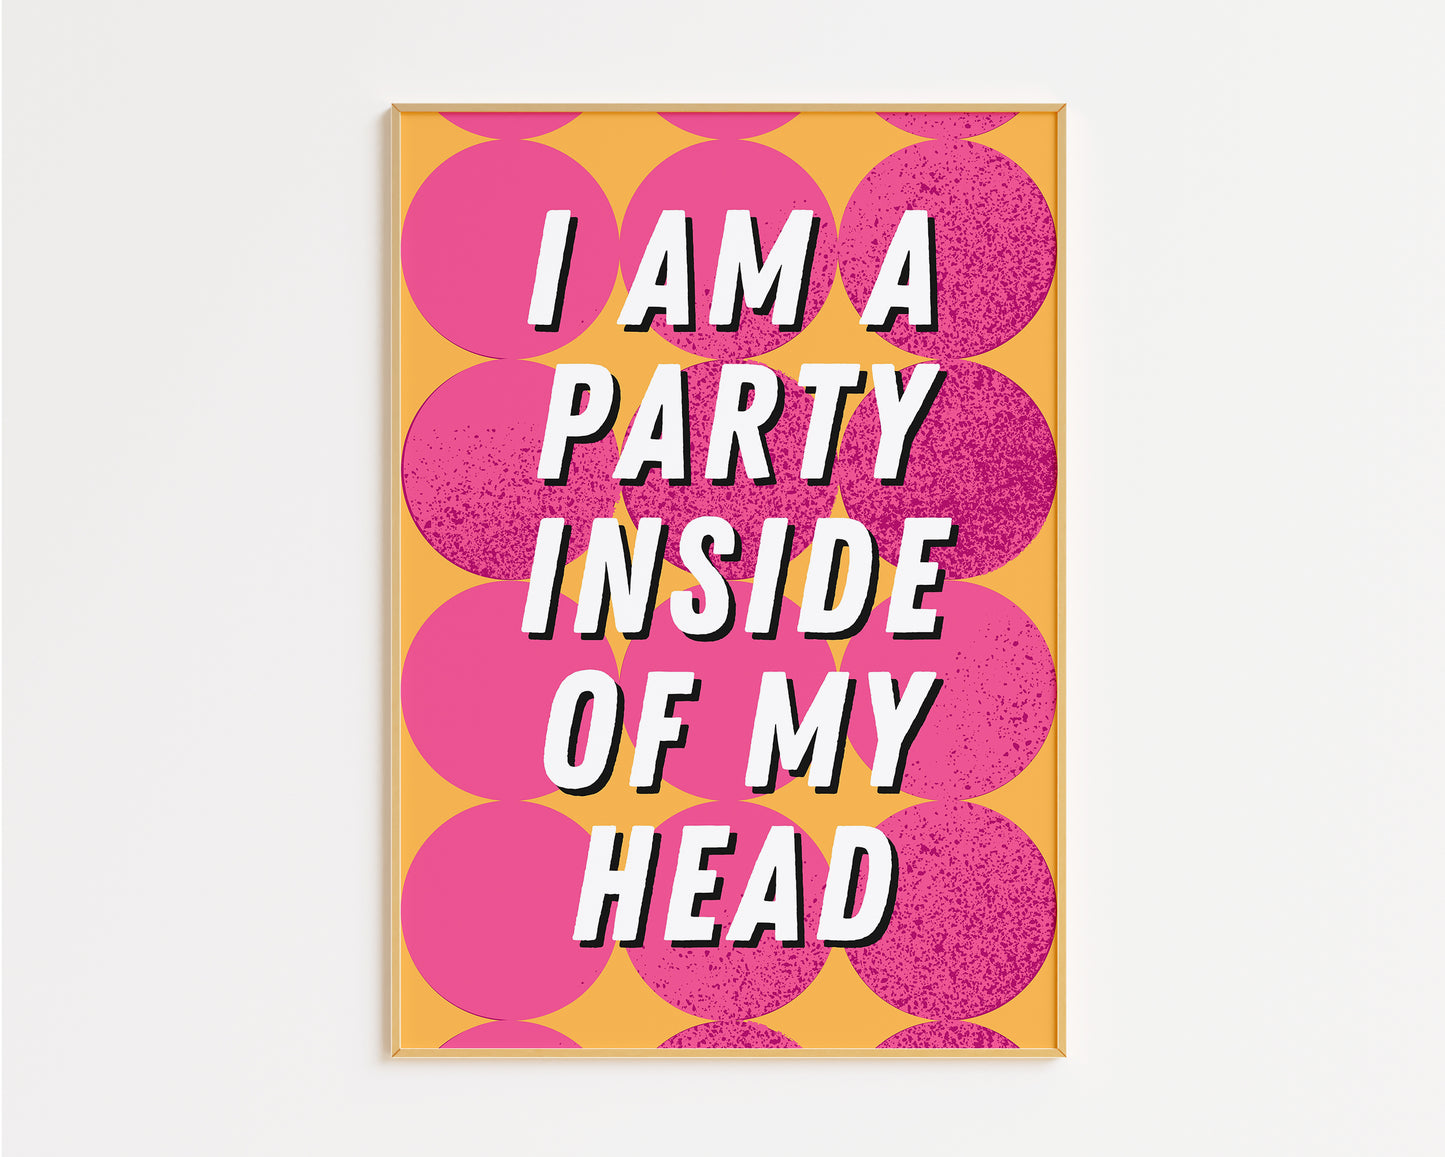 I Am a Party Inside Of My Head Print